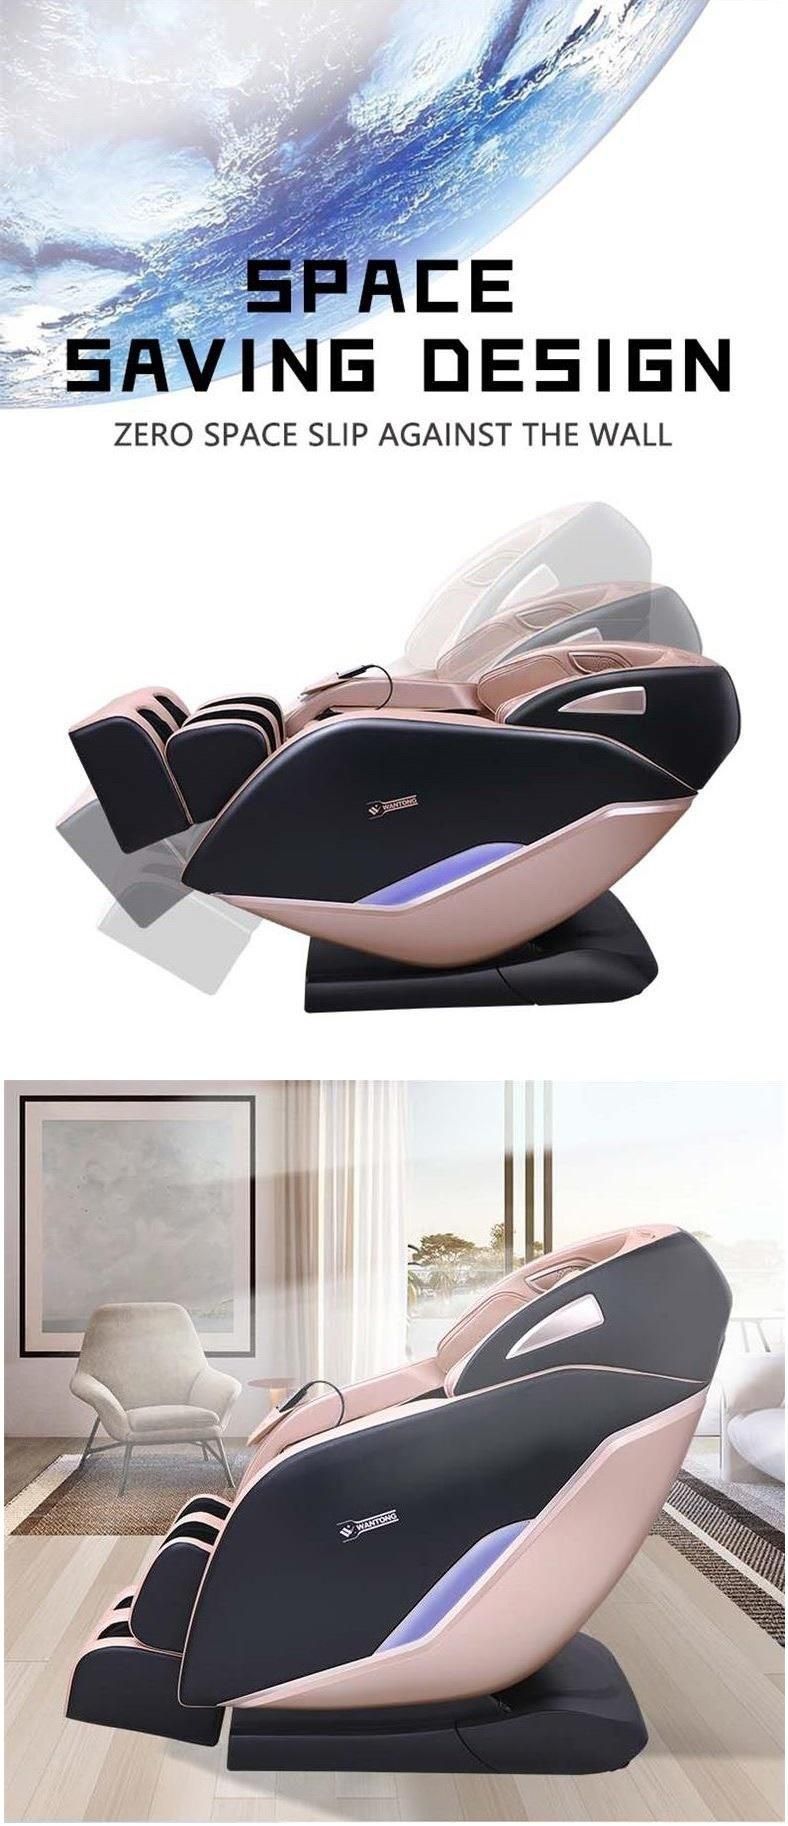 Best Professional Black Zero Gravity Human Touch Stretch 4D SL Track Latest Electronic Massage Chair